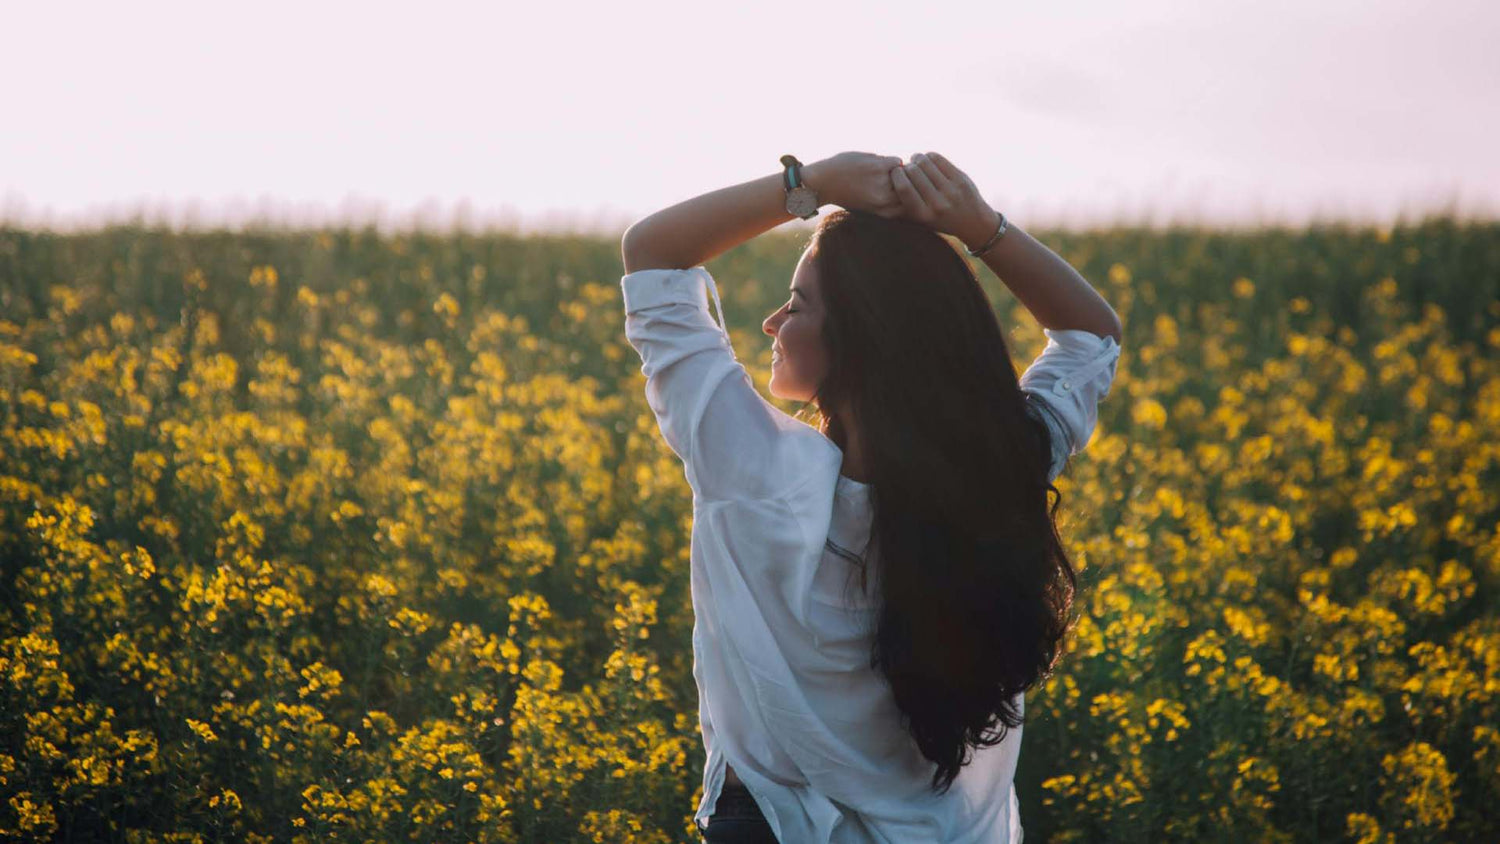 A dark haired woman wearing a white shirt stands before a field of yellow flowers at golden hour with an expression of calm, her arms raised above her head.